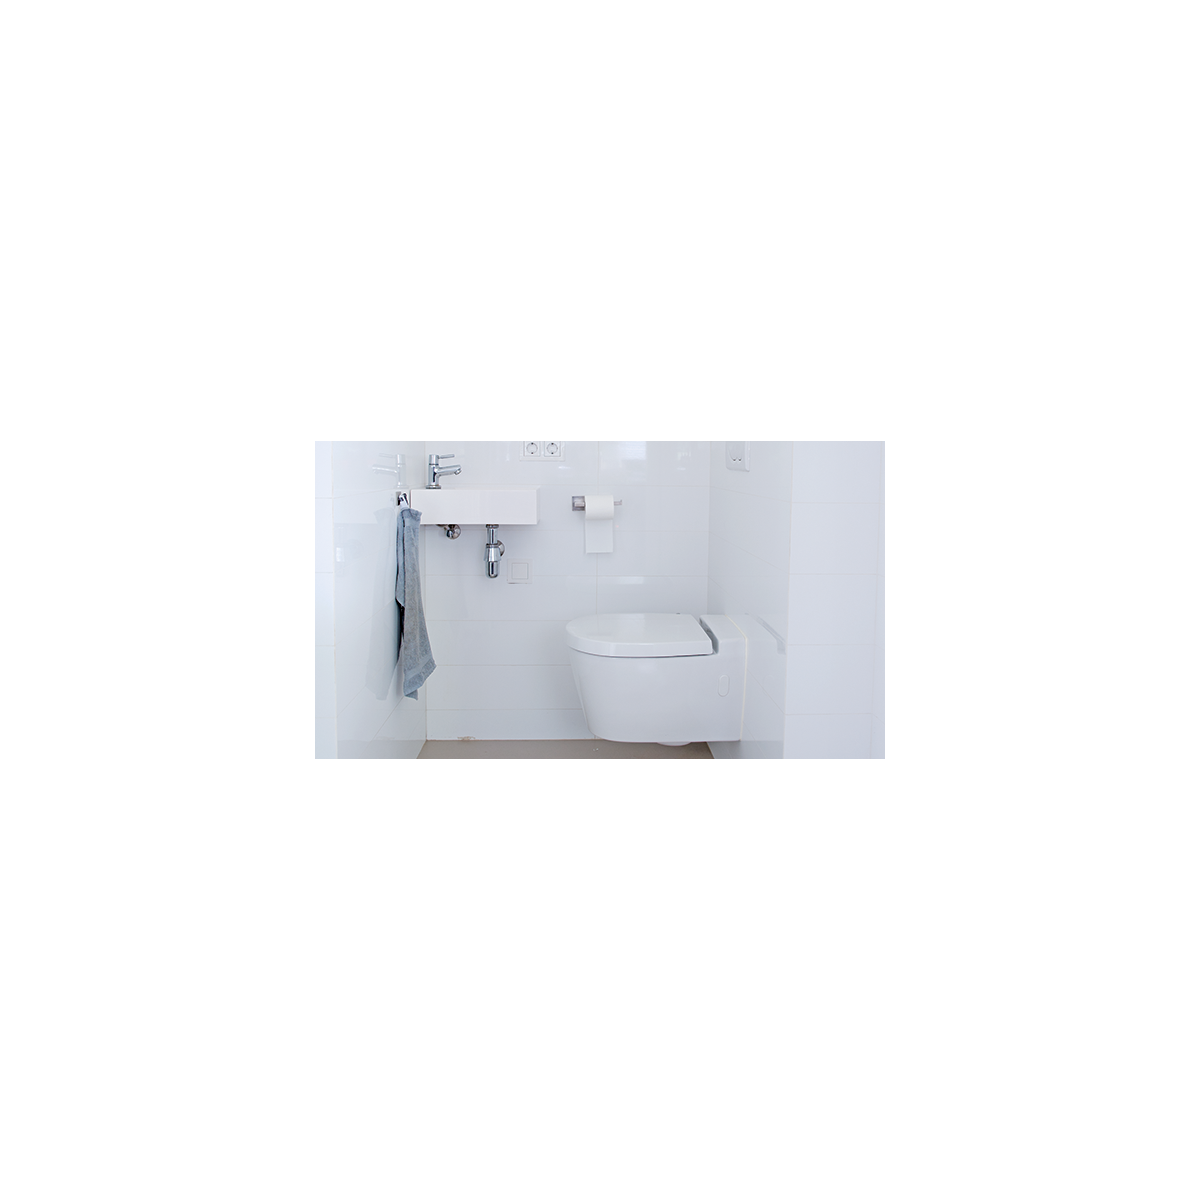 Spray for hygienic cleaning of toilets